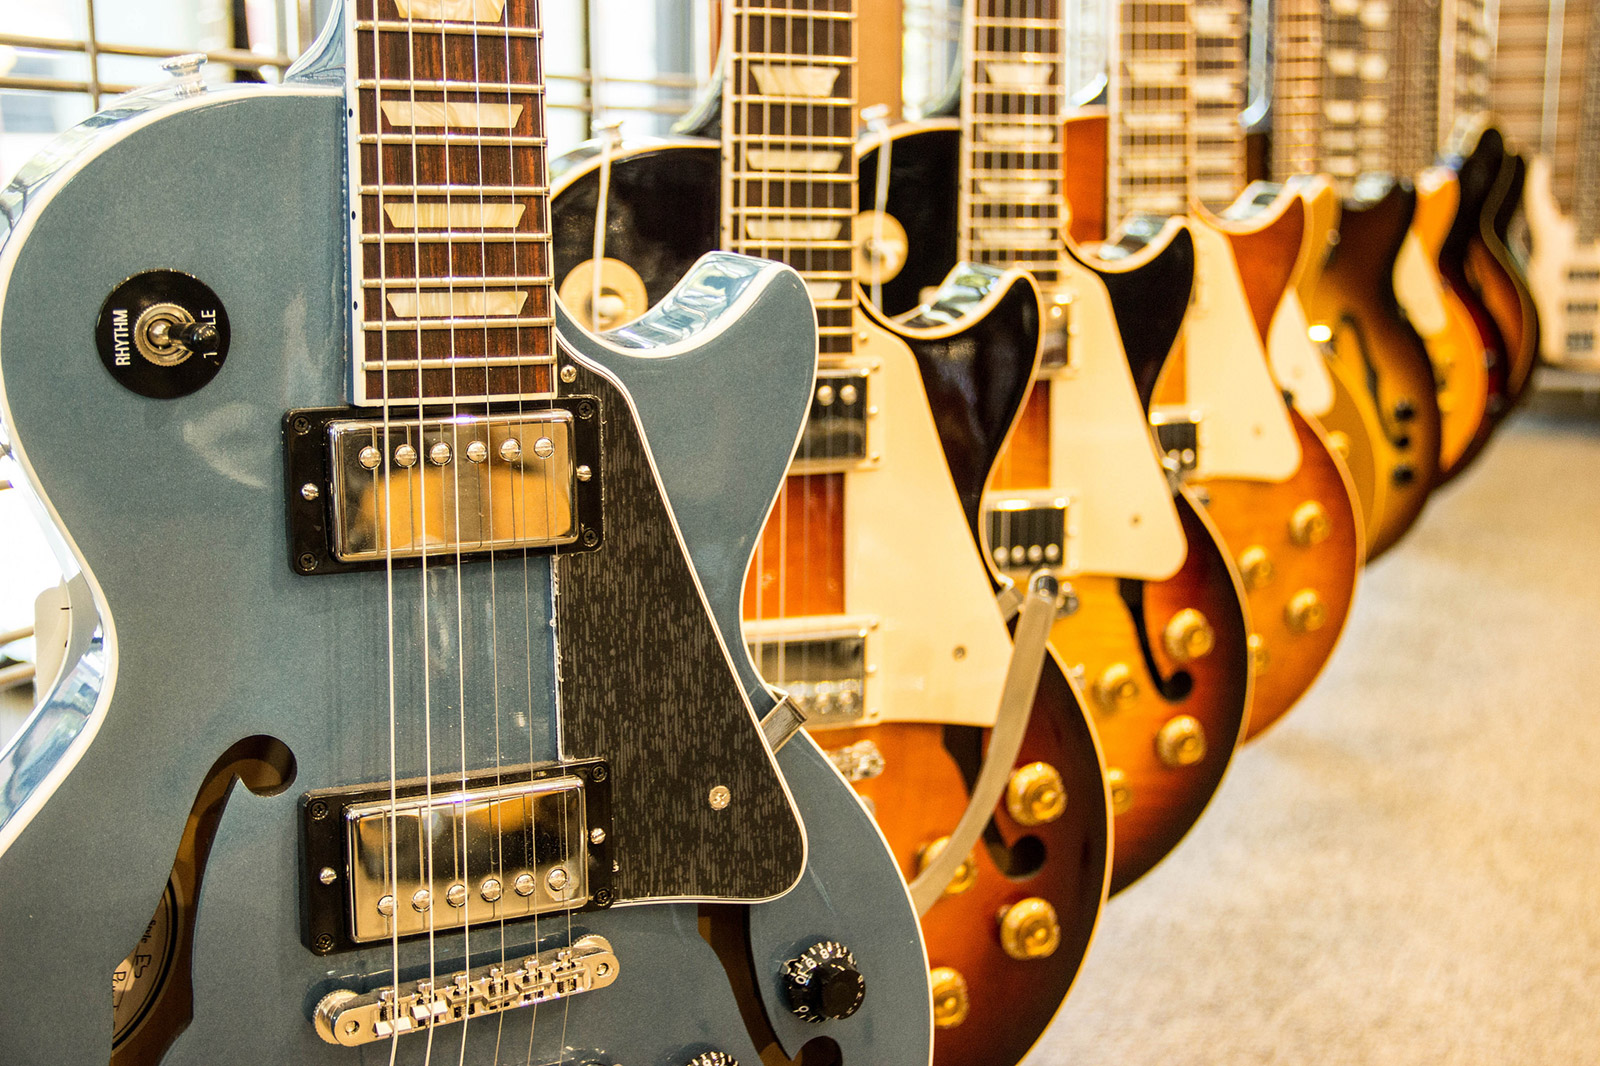 Iconic guitar makers Gibson have gone bankrupt